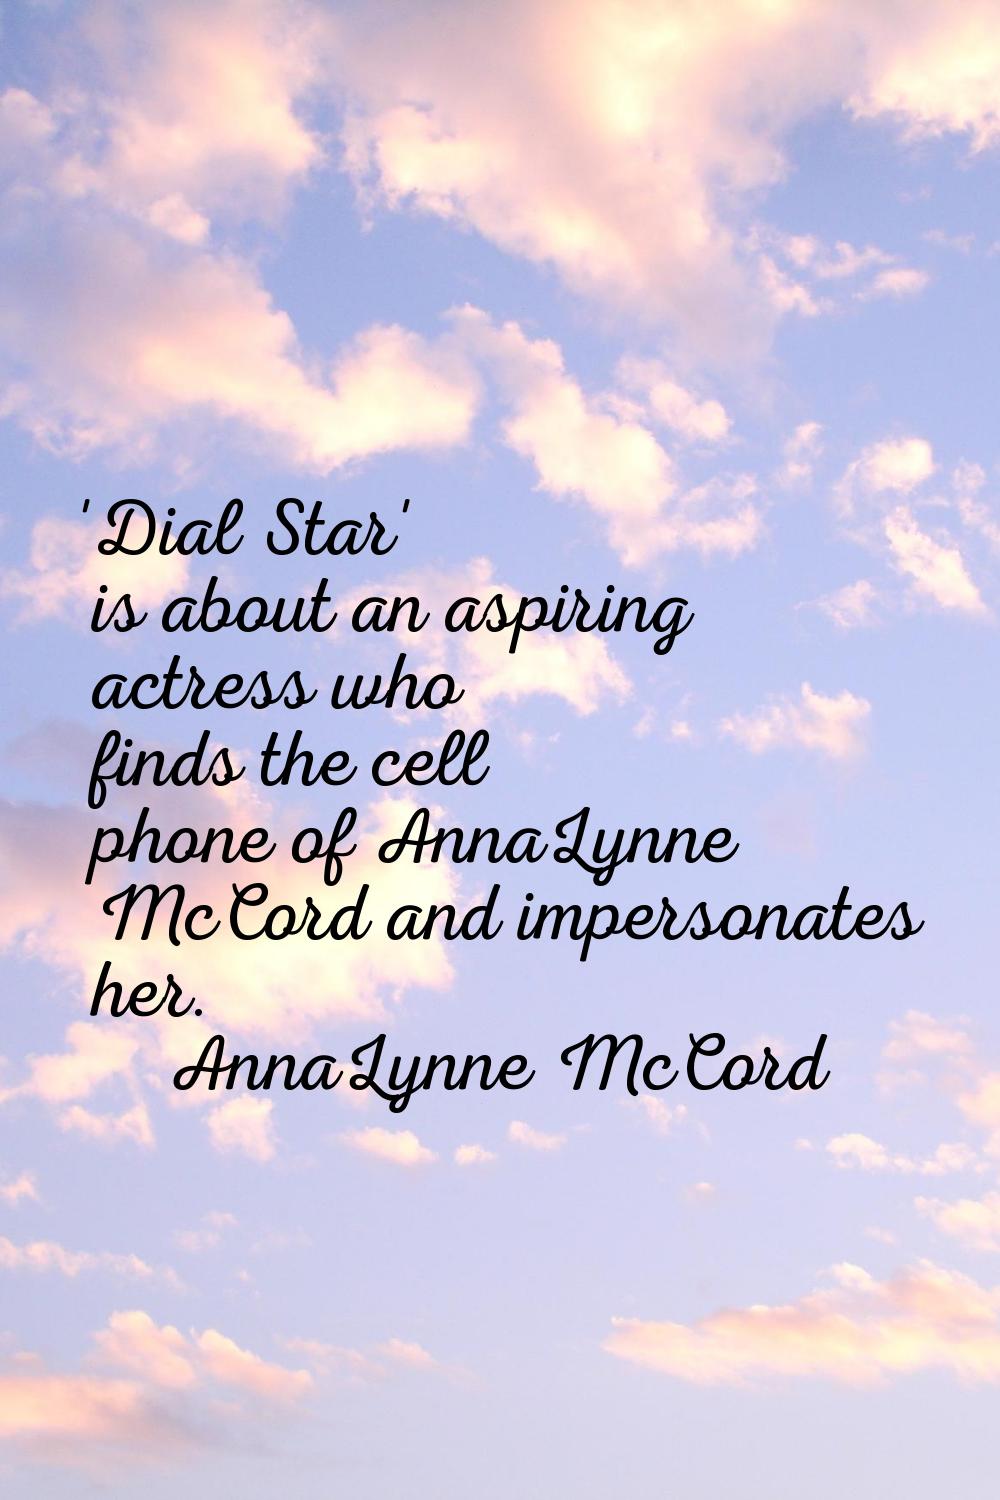 'Dial Star' is about an aspiring actress who finds the cell phone of AnnaLynne McCord and impersona